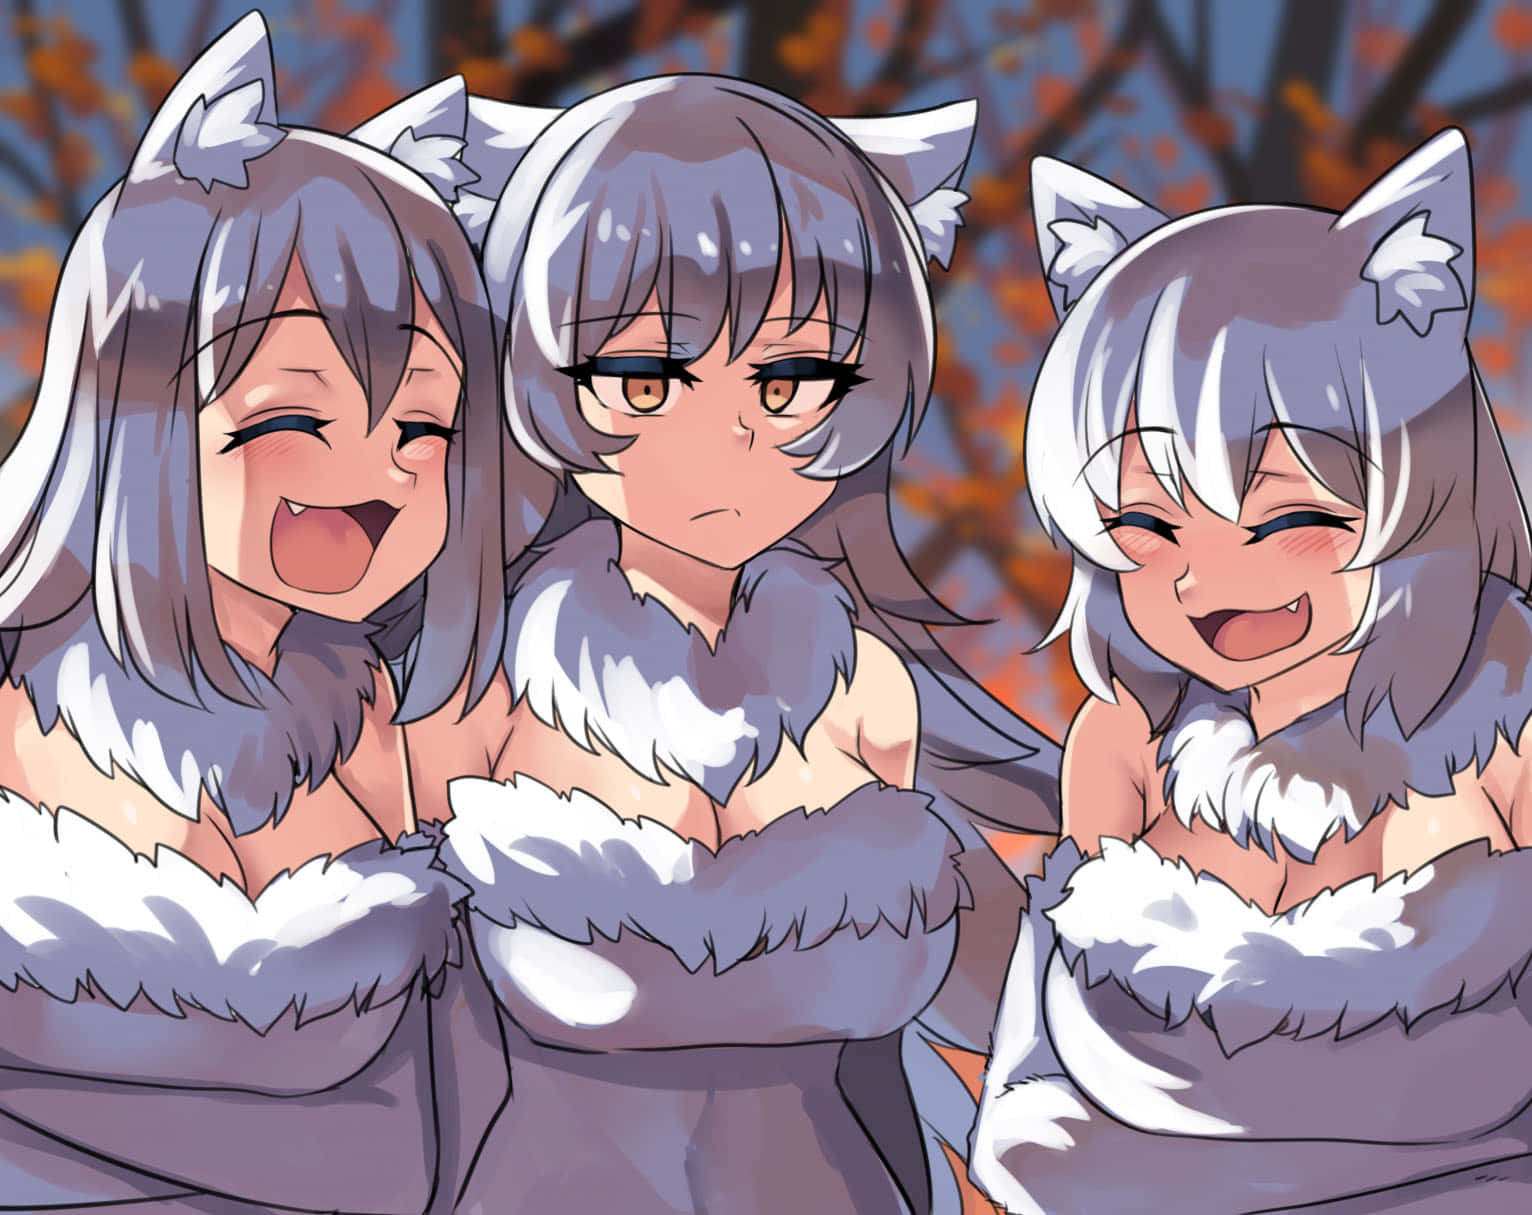 Three Anime Girls In Fur Clothes Are Smiling